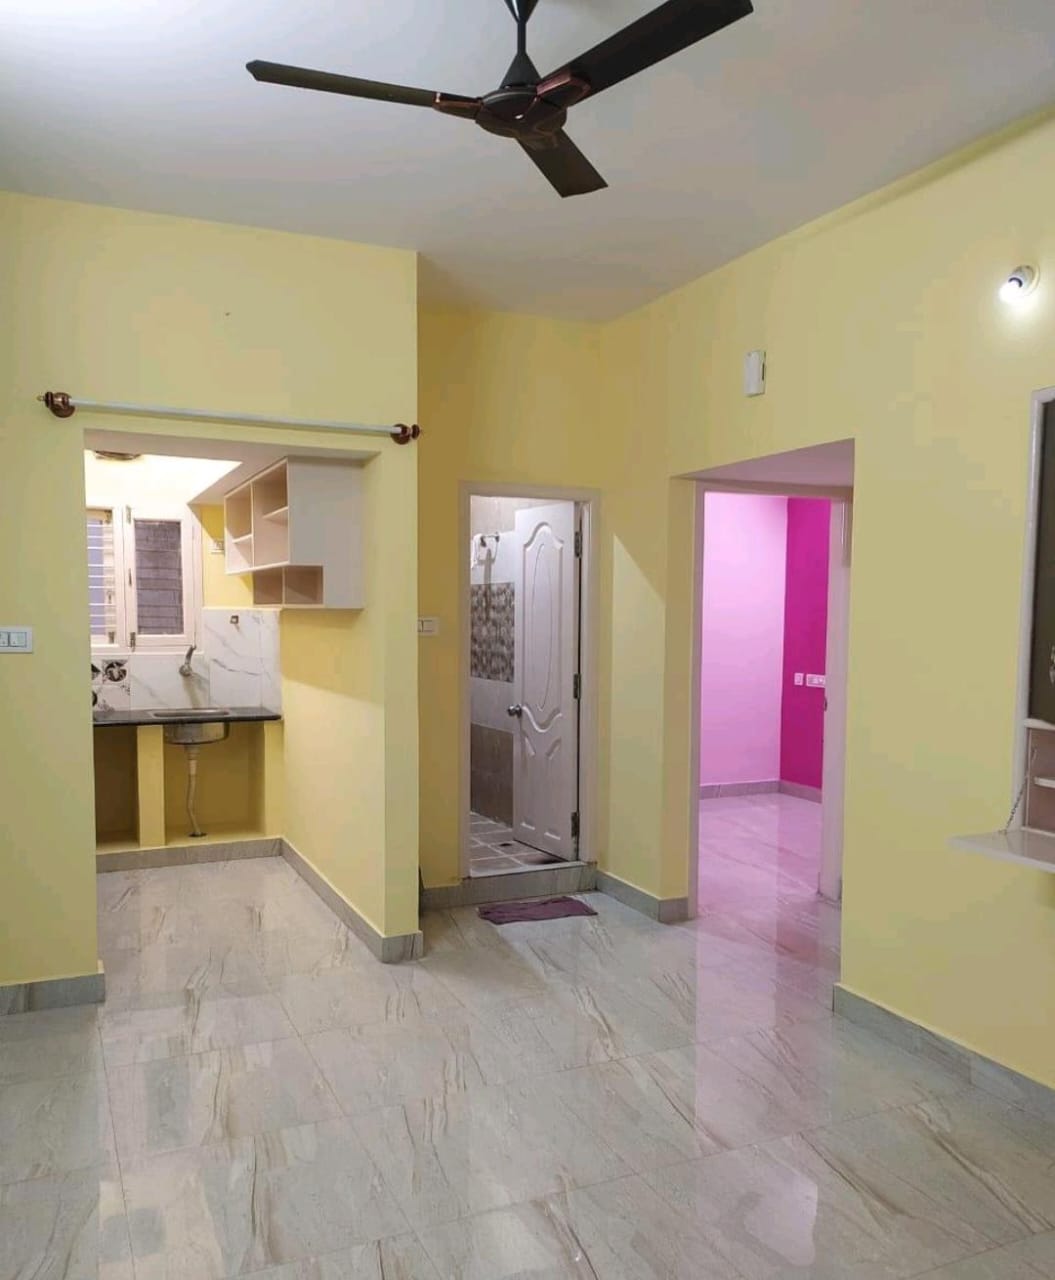 2 BHK Independent House for Lease Only at JAML2 - 2588 in Chikkalasandra